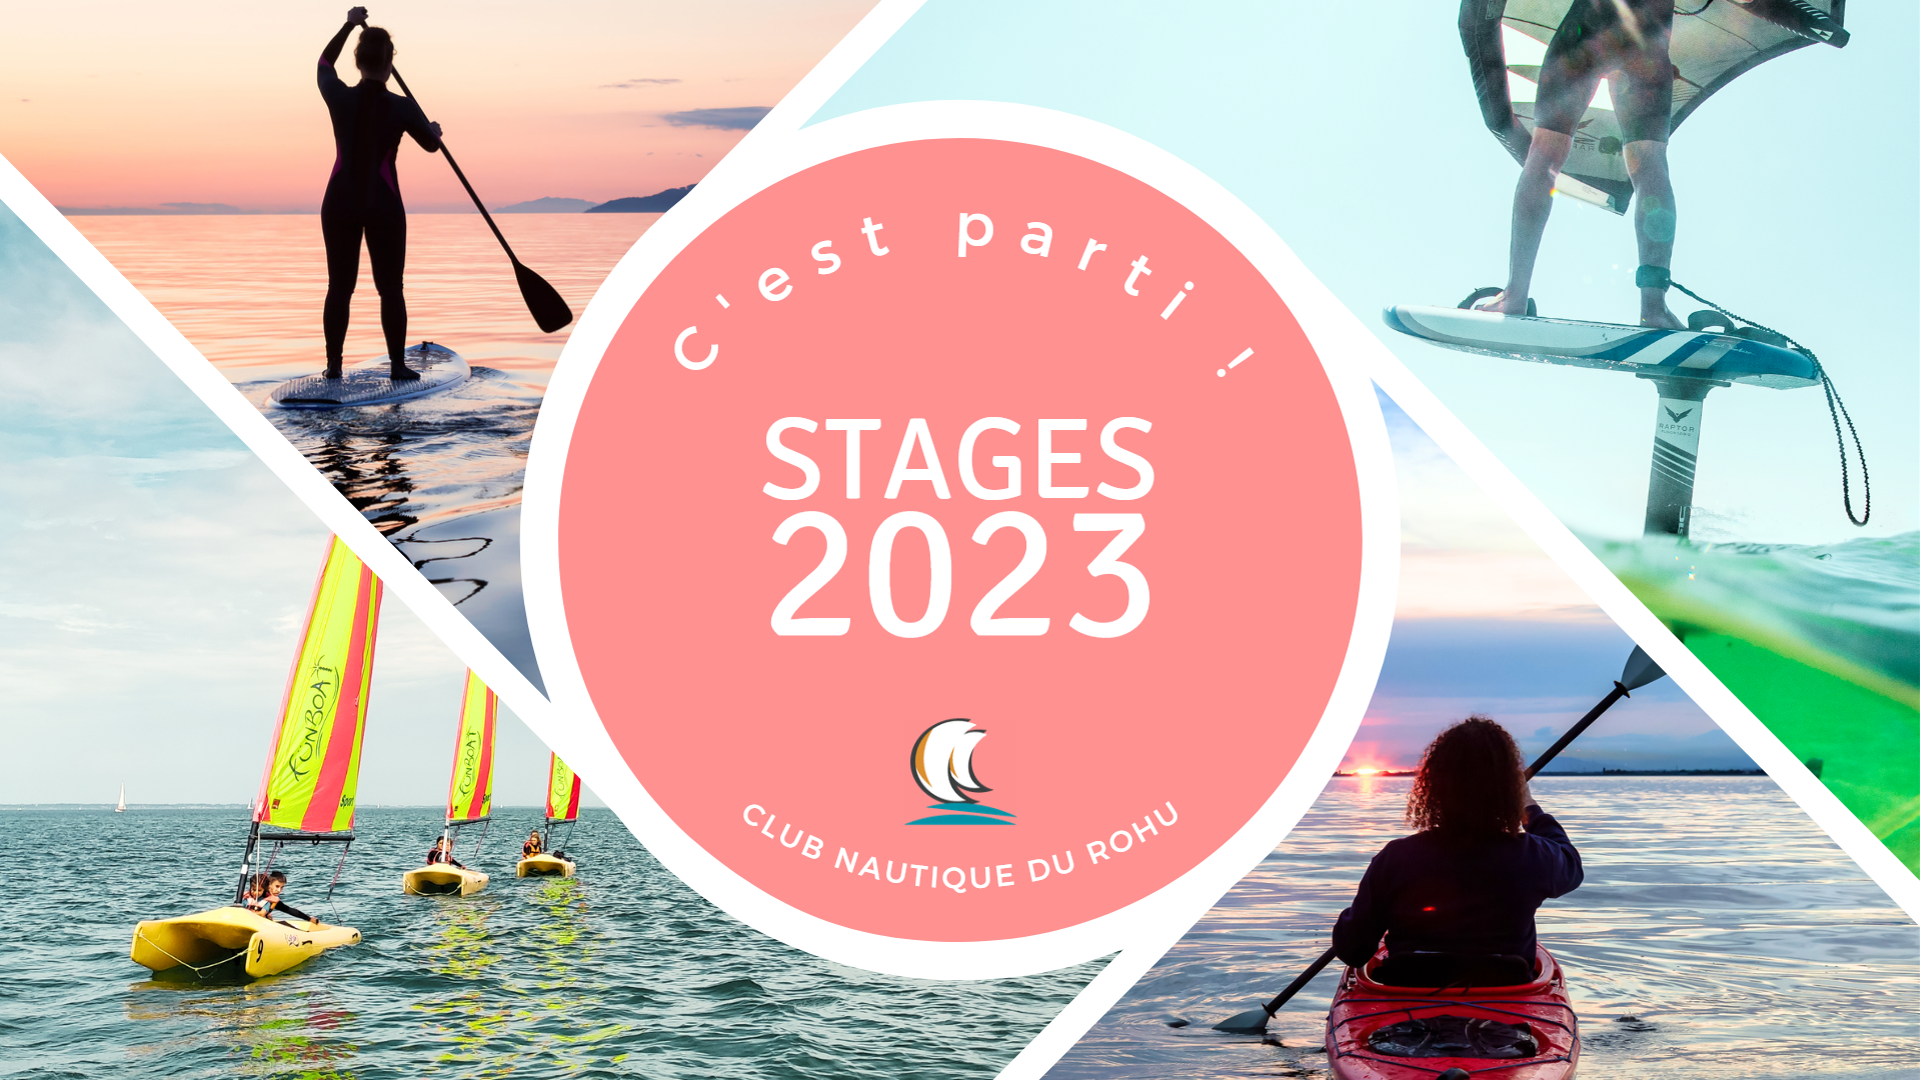 Stages 2023